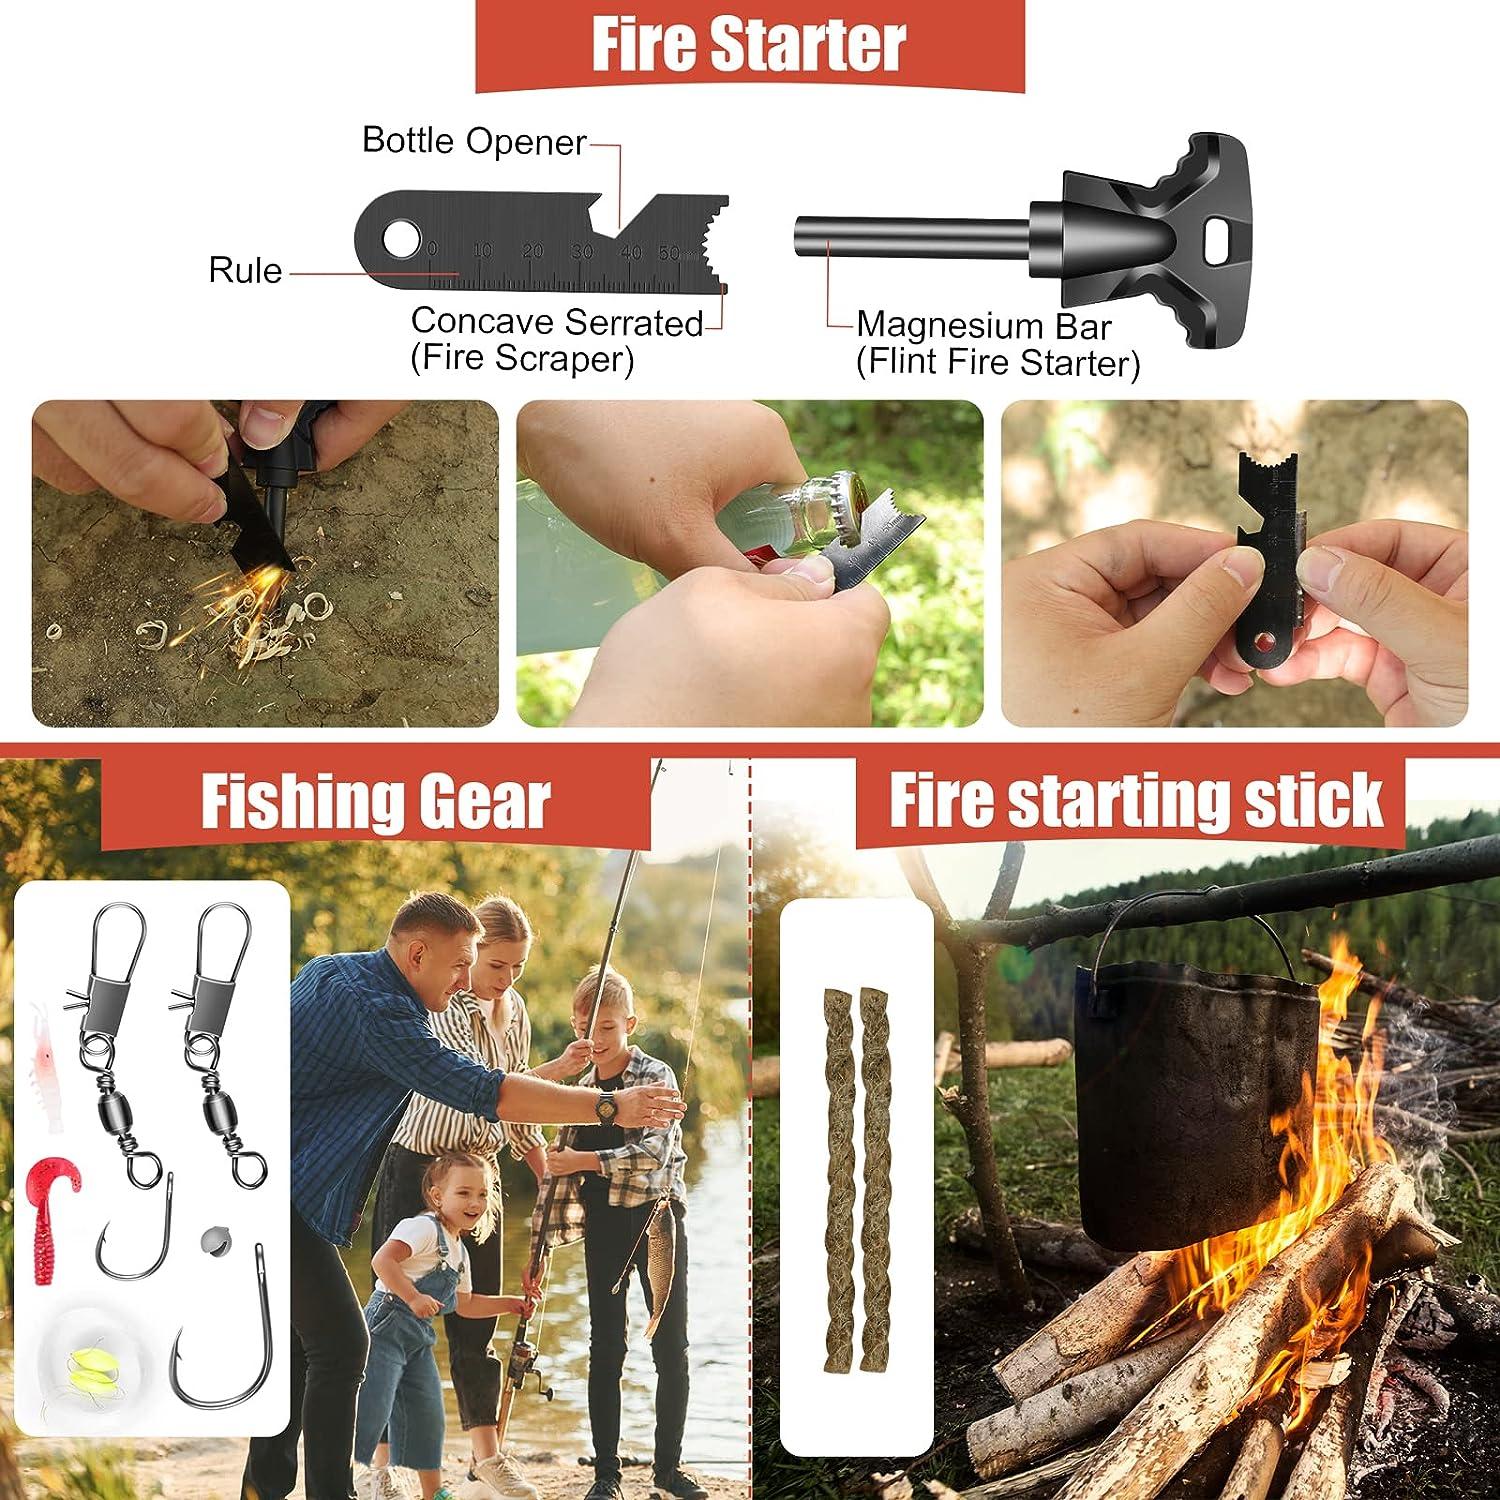 Gifts for Men Dad Husband, Christmas Day, Survival Kits 14 in 1,Survival  Gear and Equipment, Cool Gadget, Birthday Gifts for Him Boy Boyfriend Teen  Son Daughter Kids Women, for Hiking,Outdoor Camping